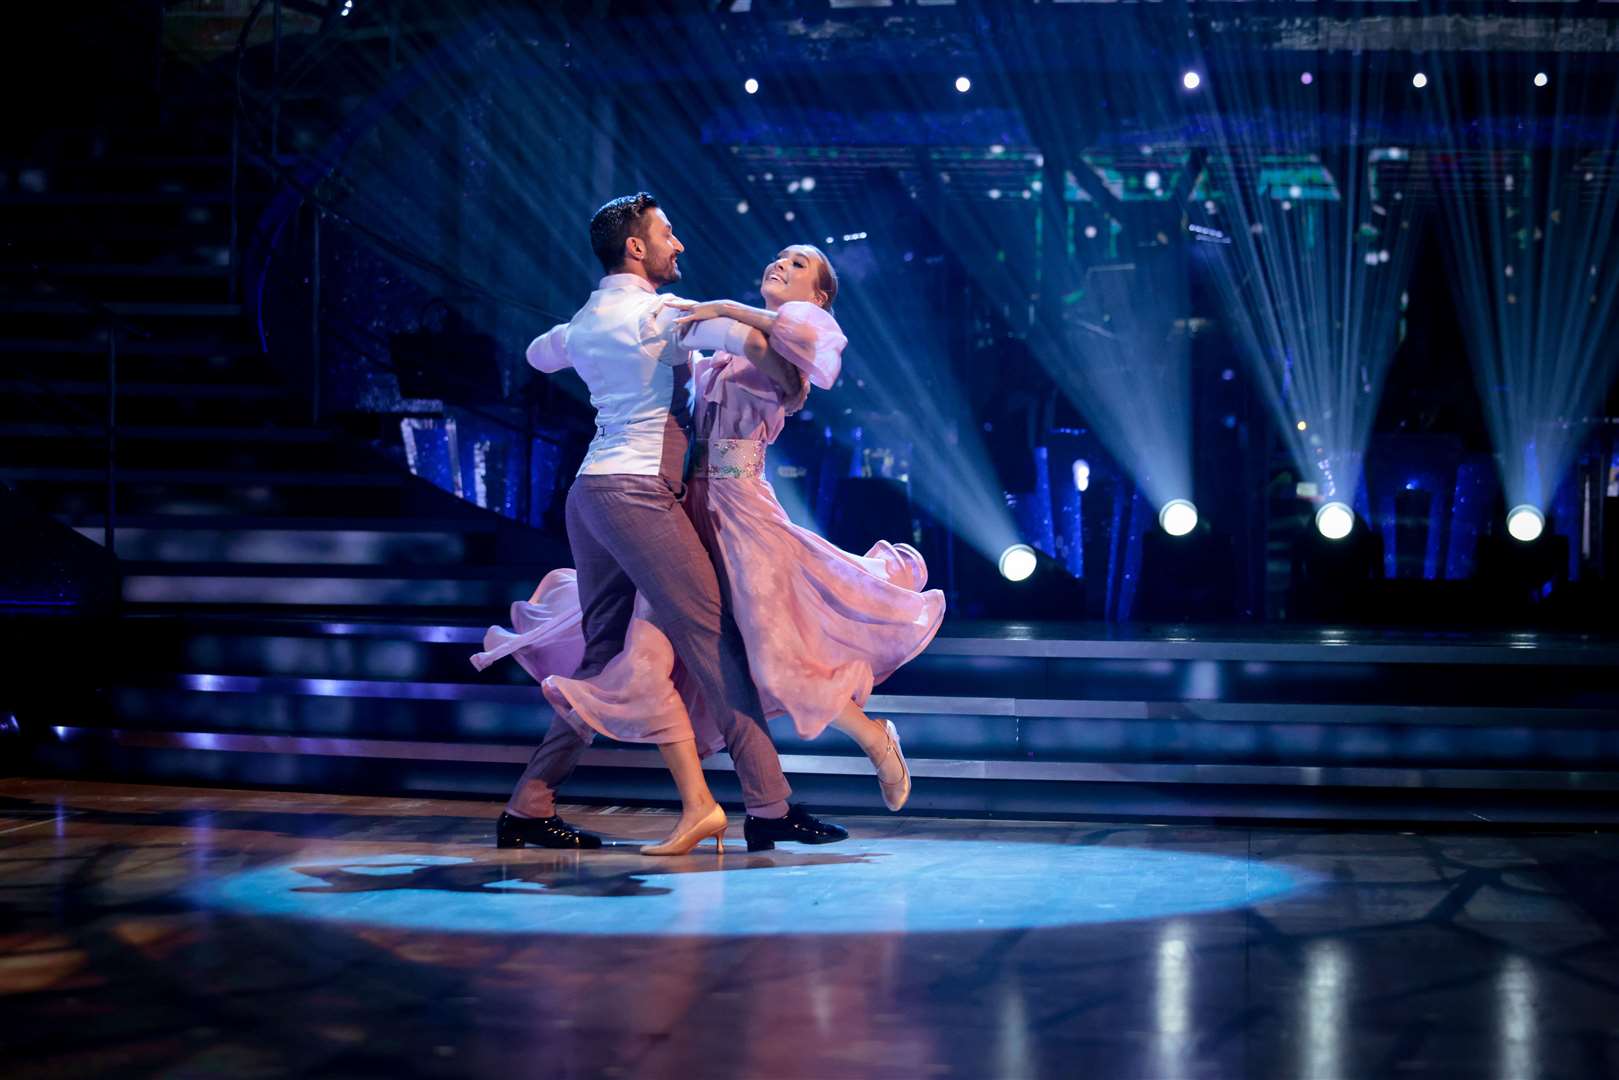 Rose and Giovanni's Waltz that won them a place in the final. Credit: BBC - Photographer: Guy Levy